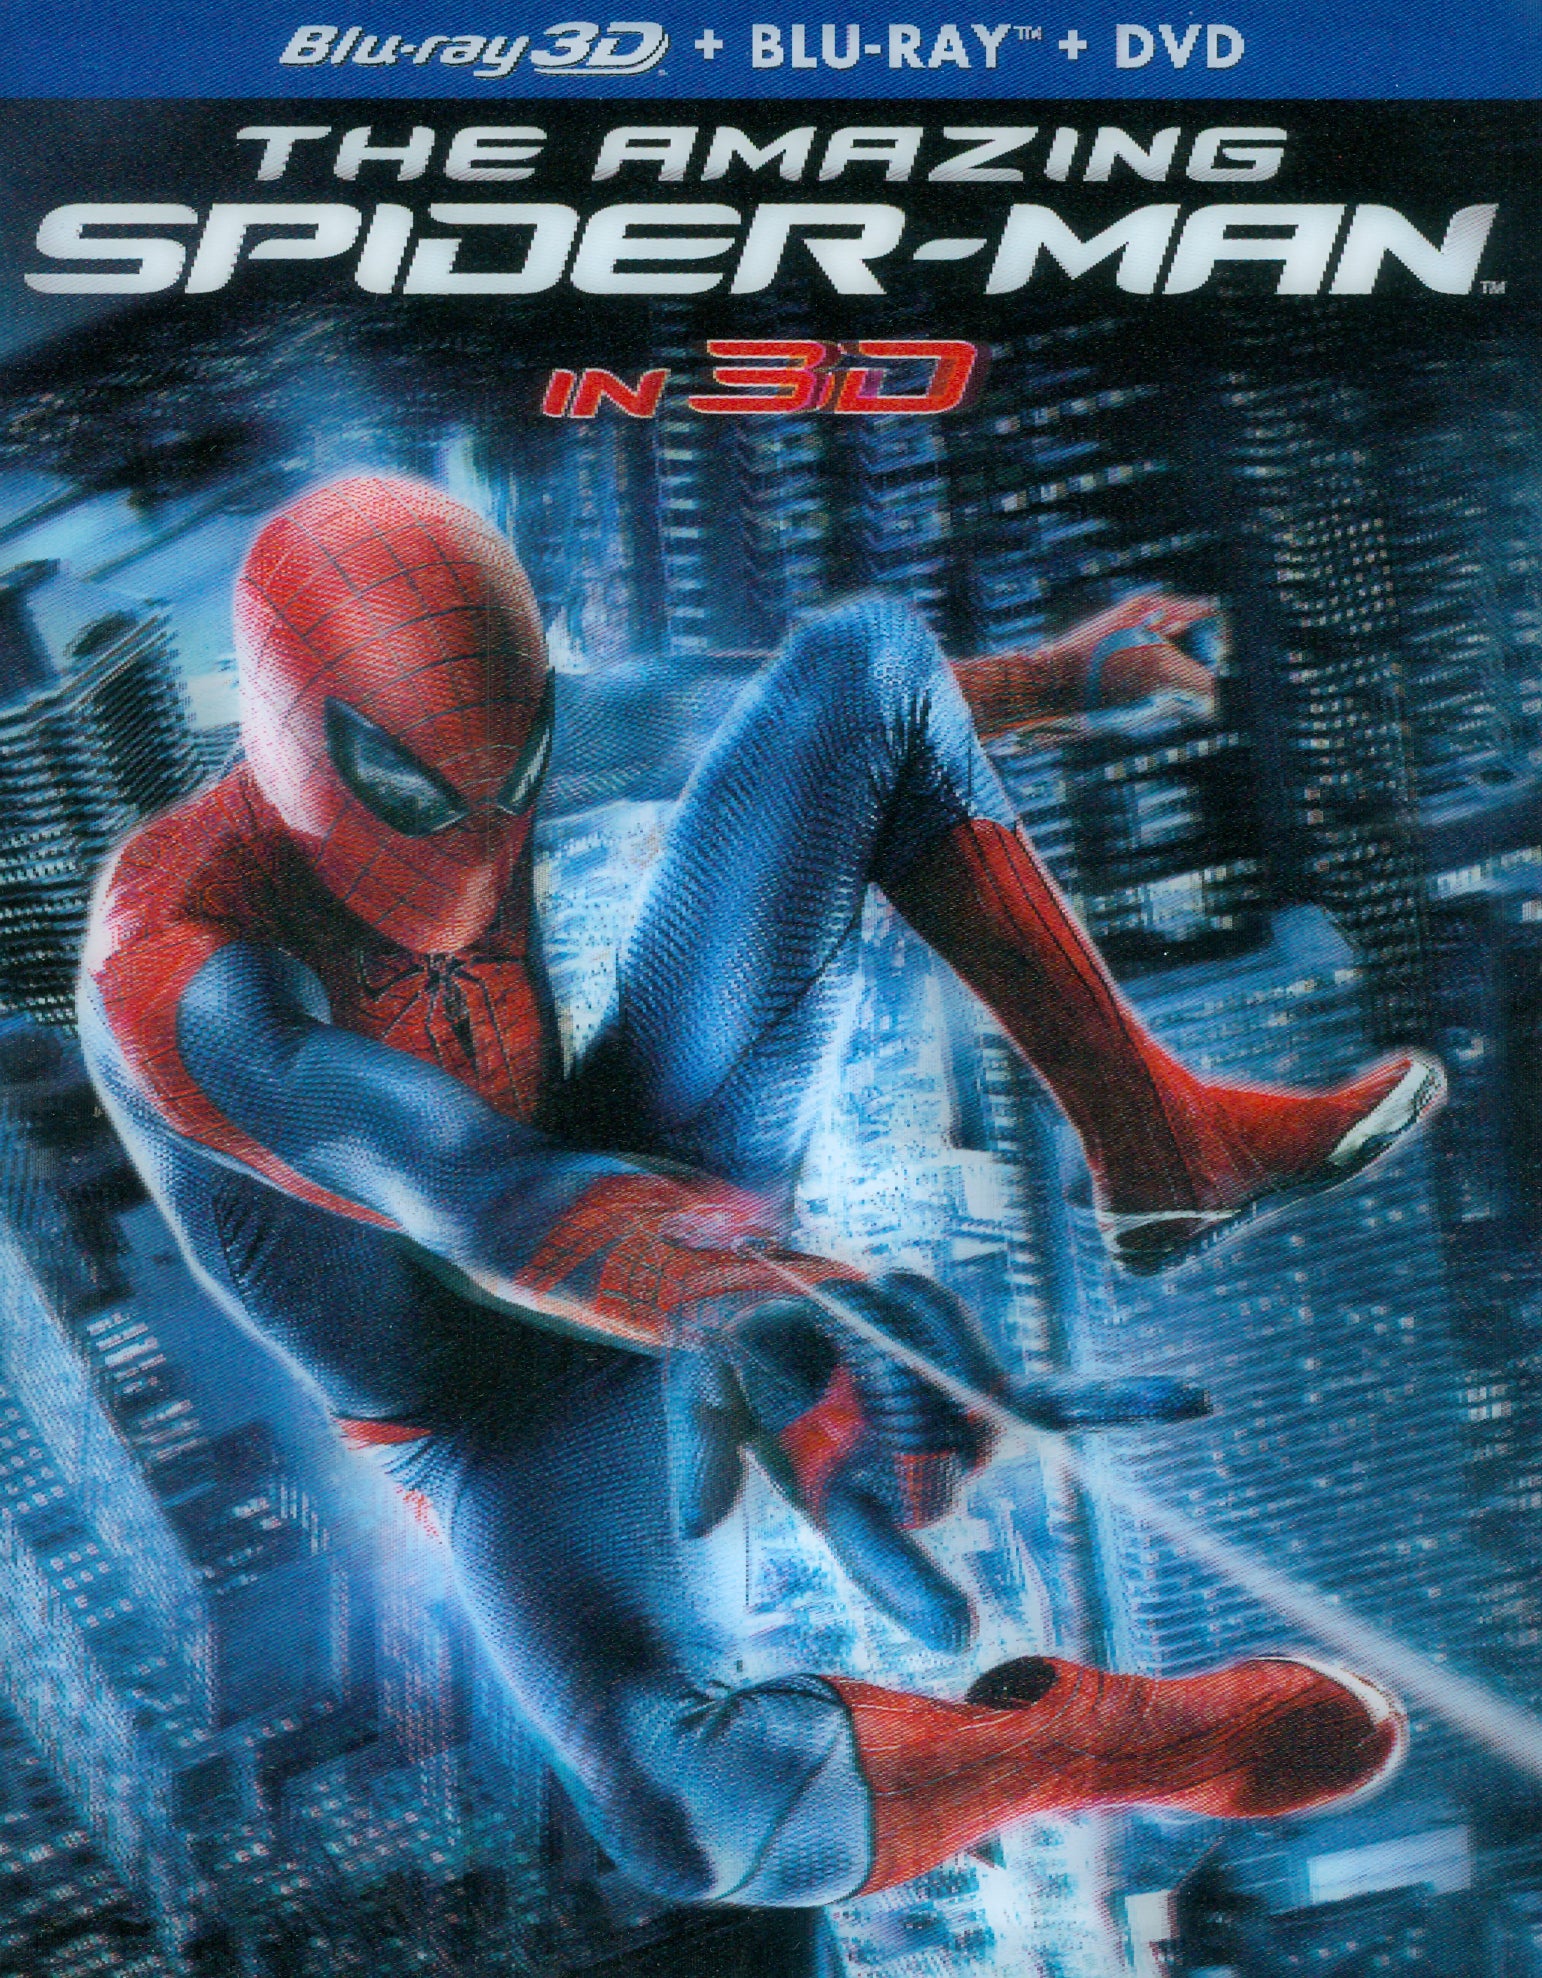 Amazing Spider-Man [4 Discs] [Includes Digital Copy] [3D] [Blu-ray/DVD] cover art